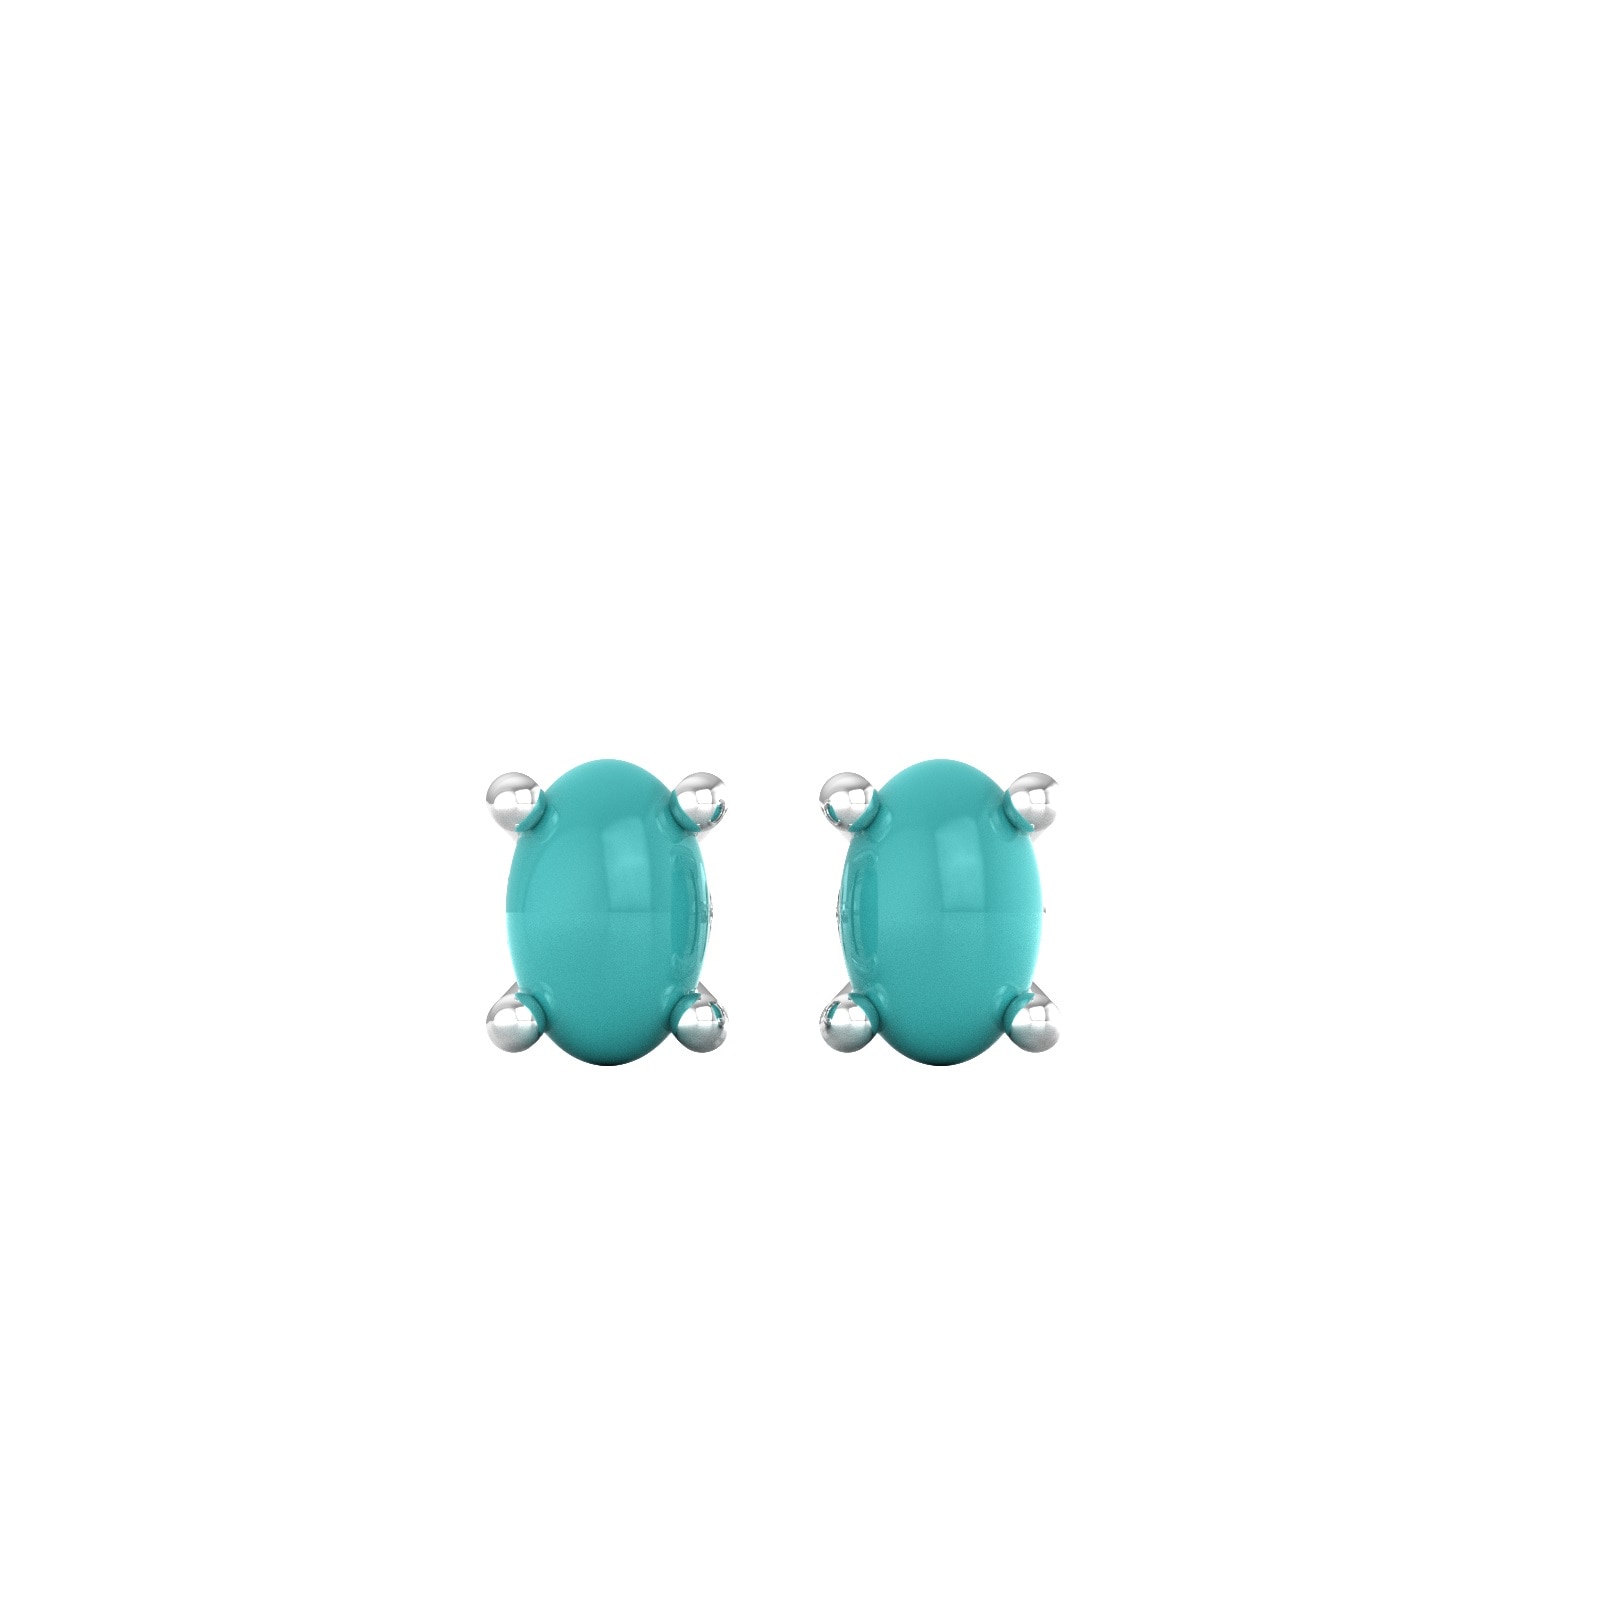 9ct White Gold 4 Claw Oval Cut Turquoise Stud Earrings